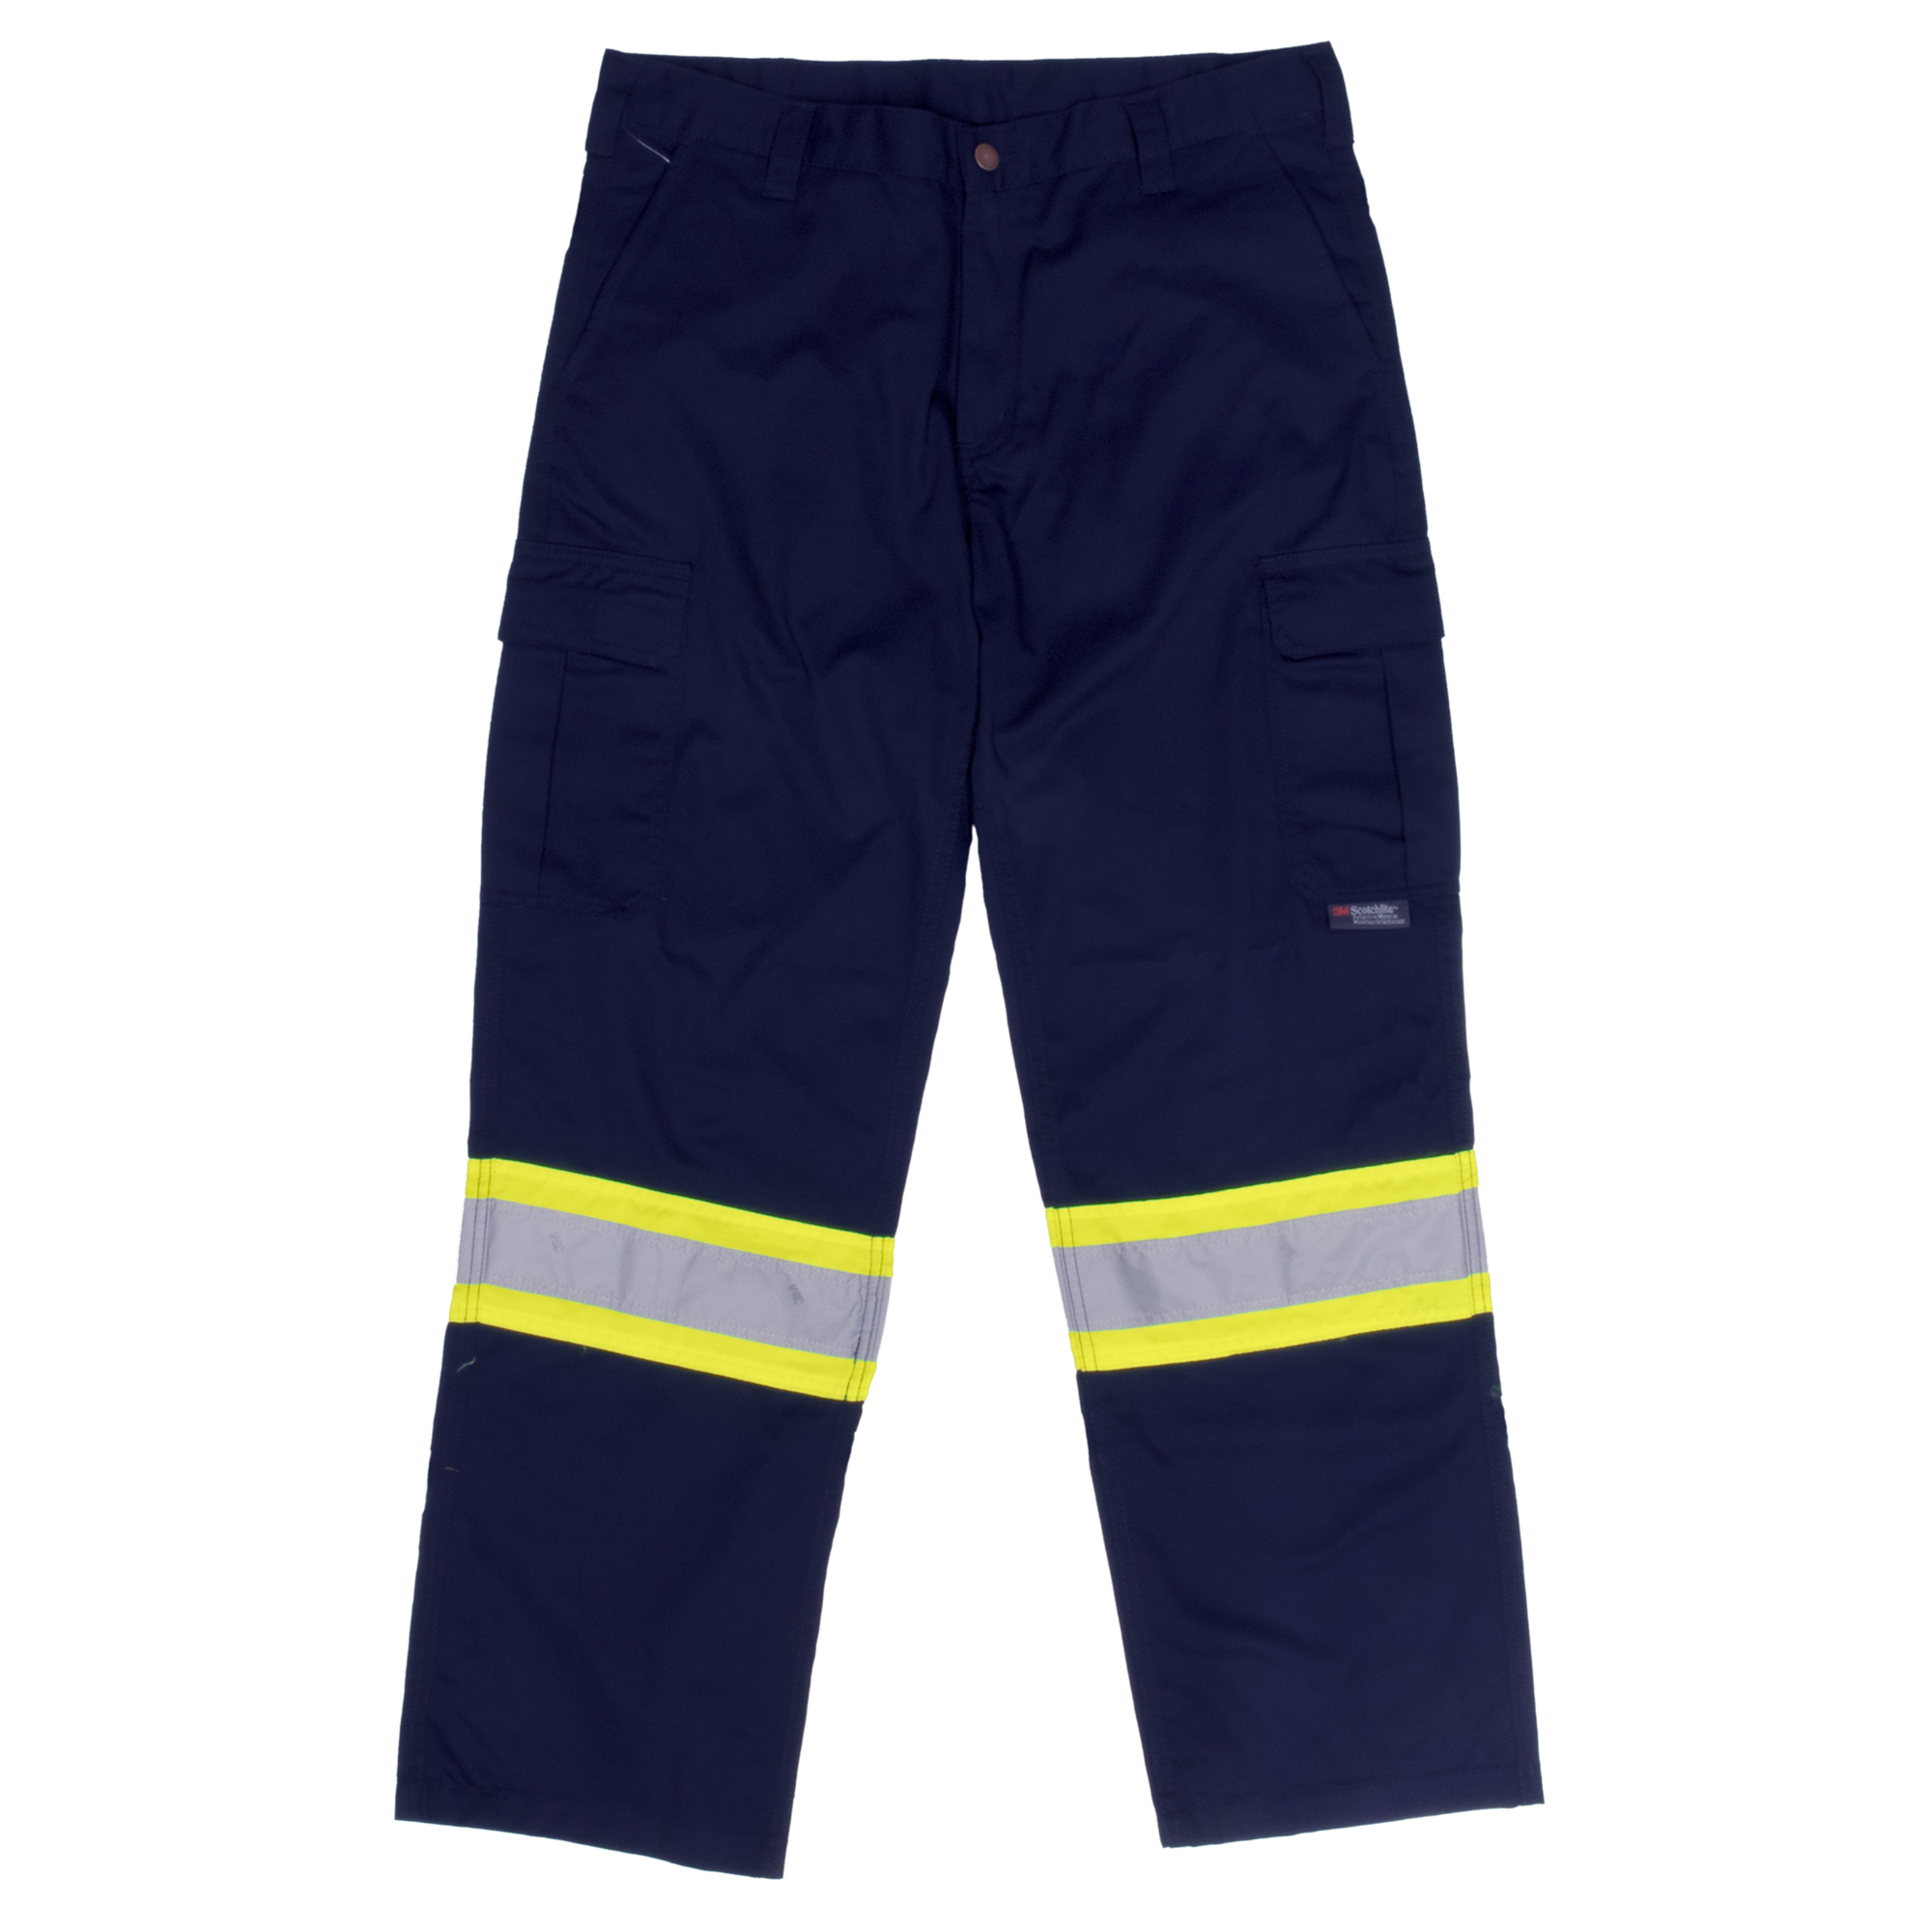 Tough Duck, Safety Cargo Utility Pant, Waist 40 in, Inseam 30 in, Color Navy, Model S60701